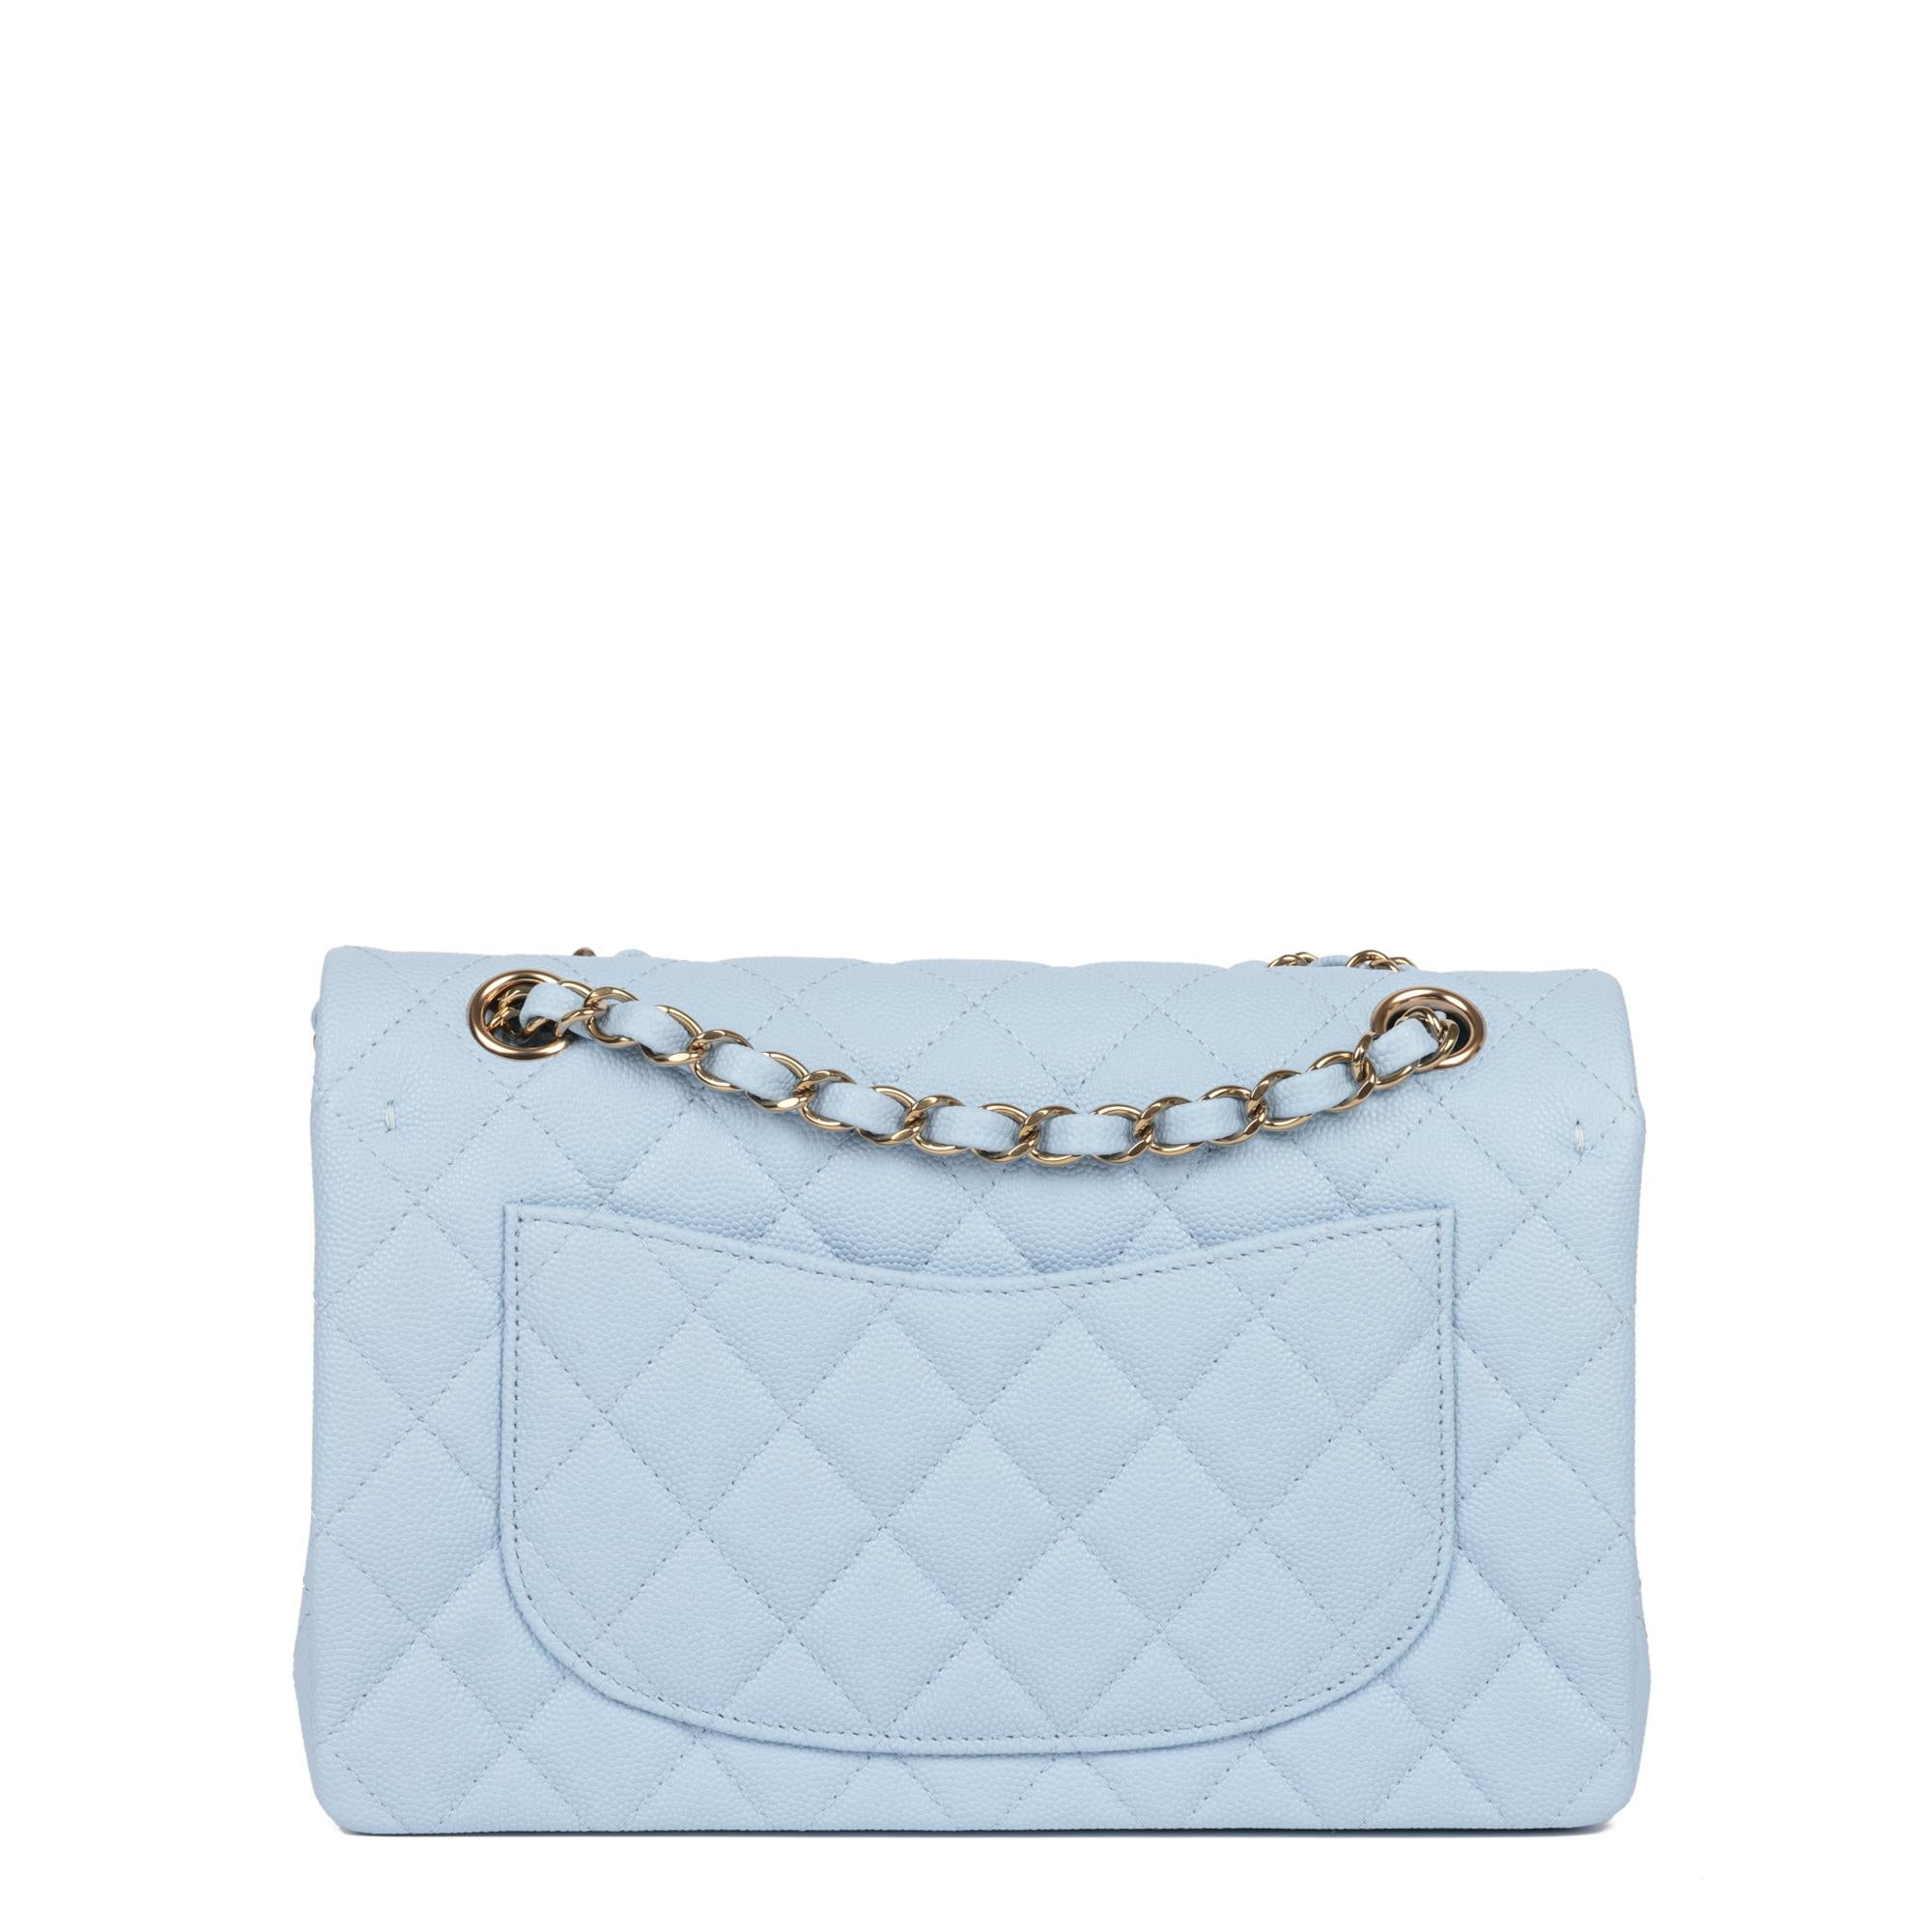 Chanel Light Blue Quilted Caviar Leather Small Classic Double Flap Bag For Sale 1